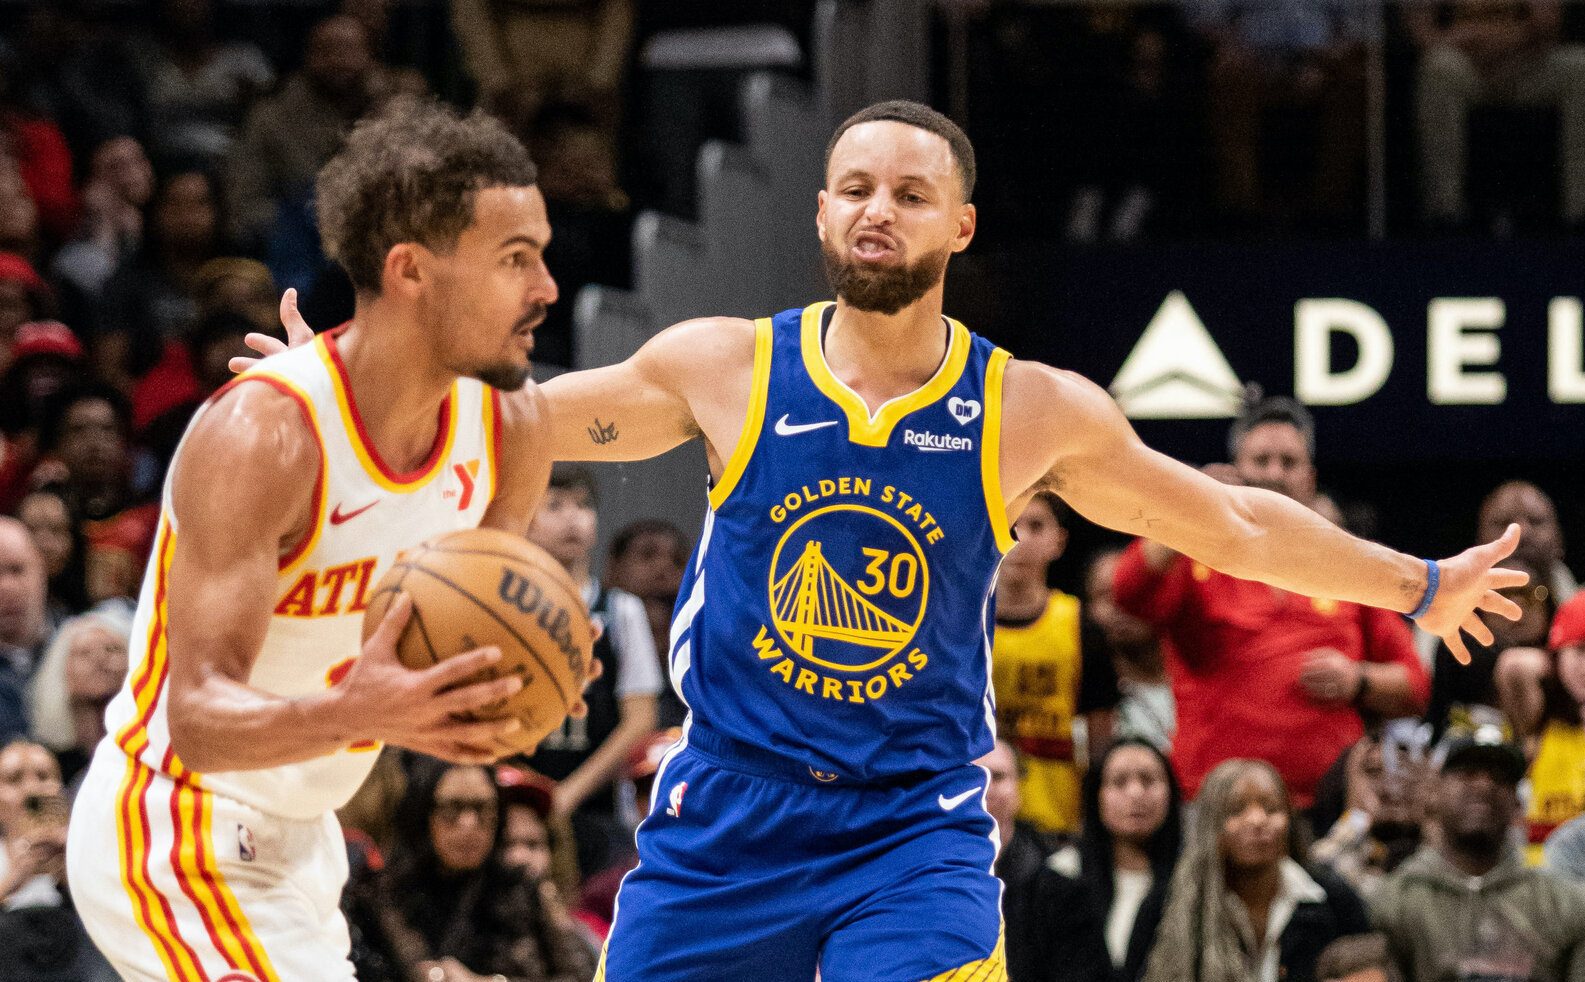 Senior scorers: Curry joins Kobe in record 60-point outburst